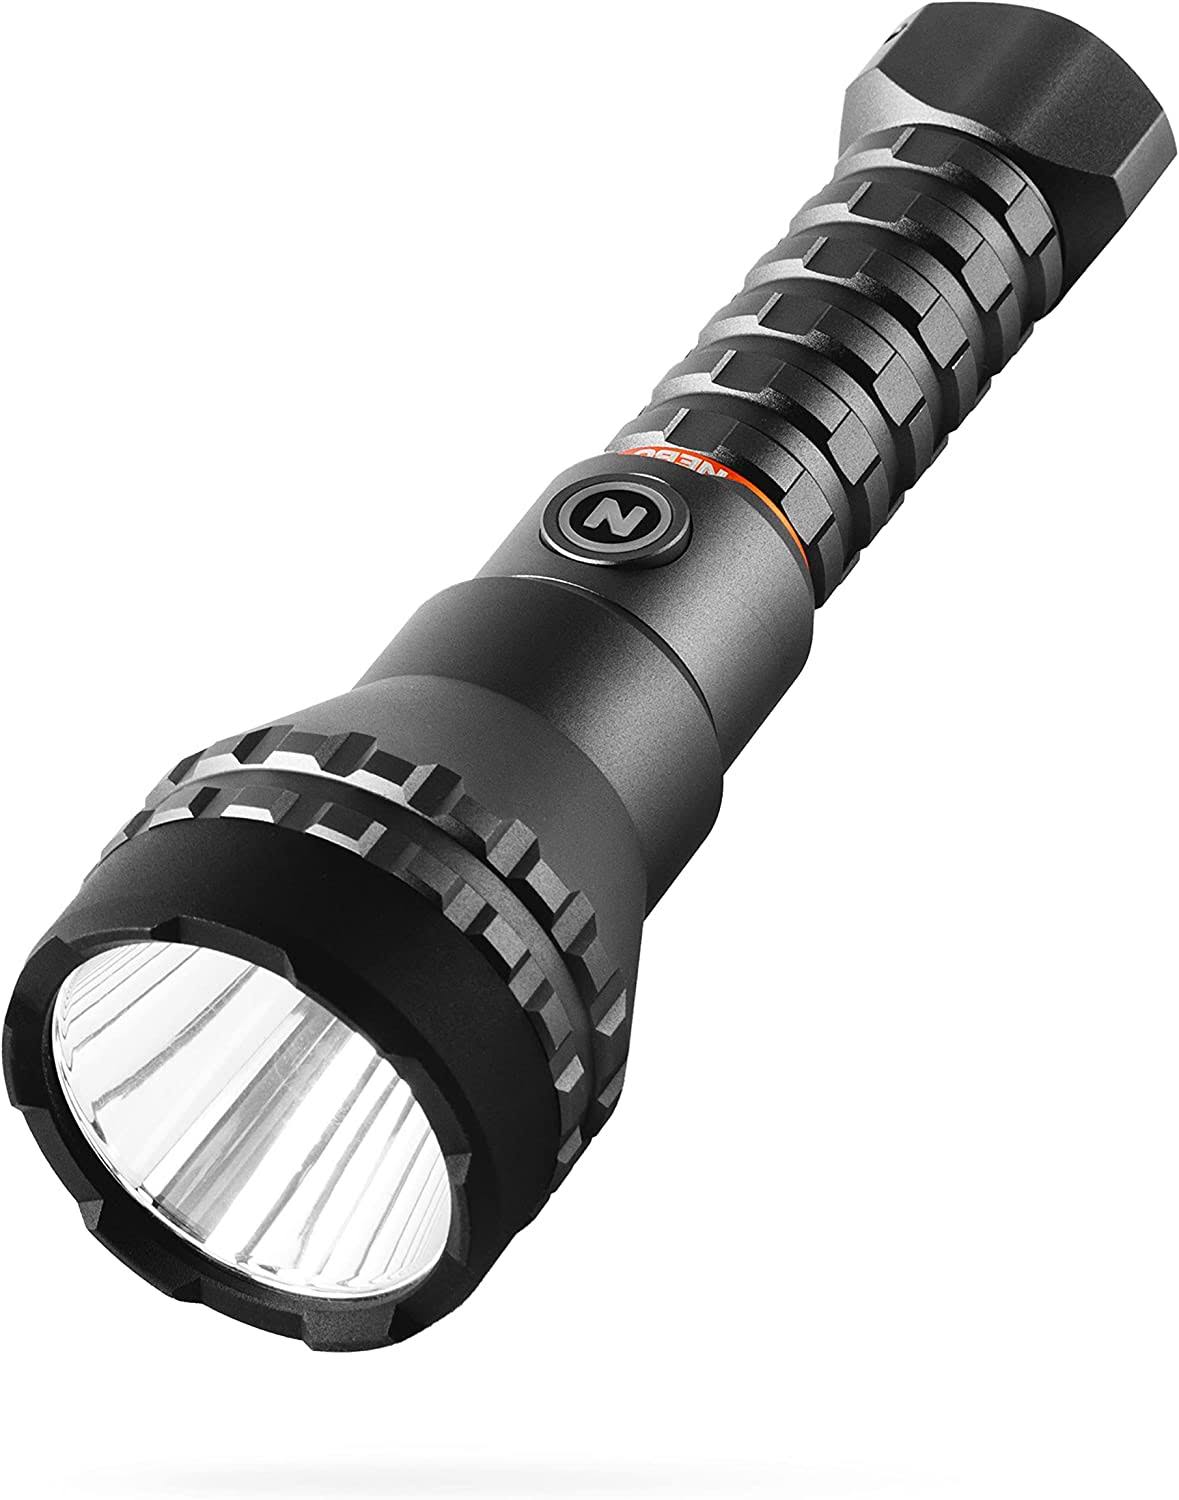 Nebo Luxtreme 500-Lumen LED Flashlight –Bright Rechargeable Flashlight with 4 Light Modes, Water Resistance, Half Mile Light Beam, Storm Gray